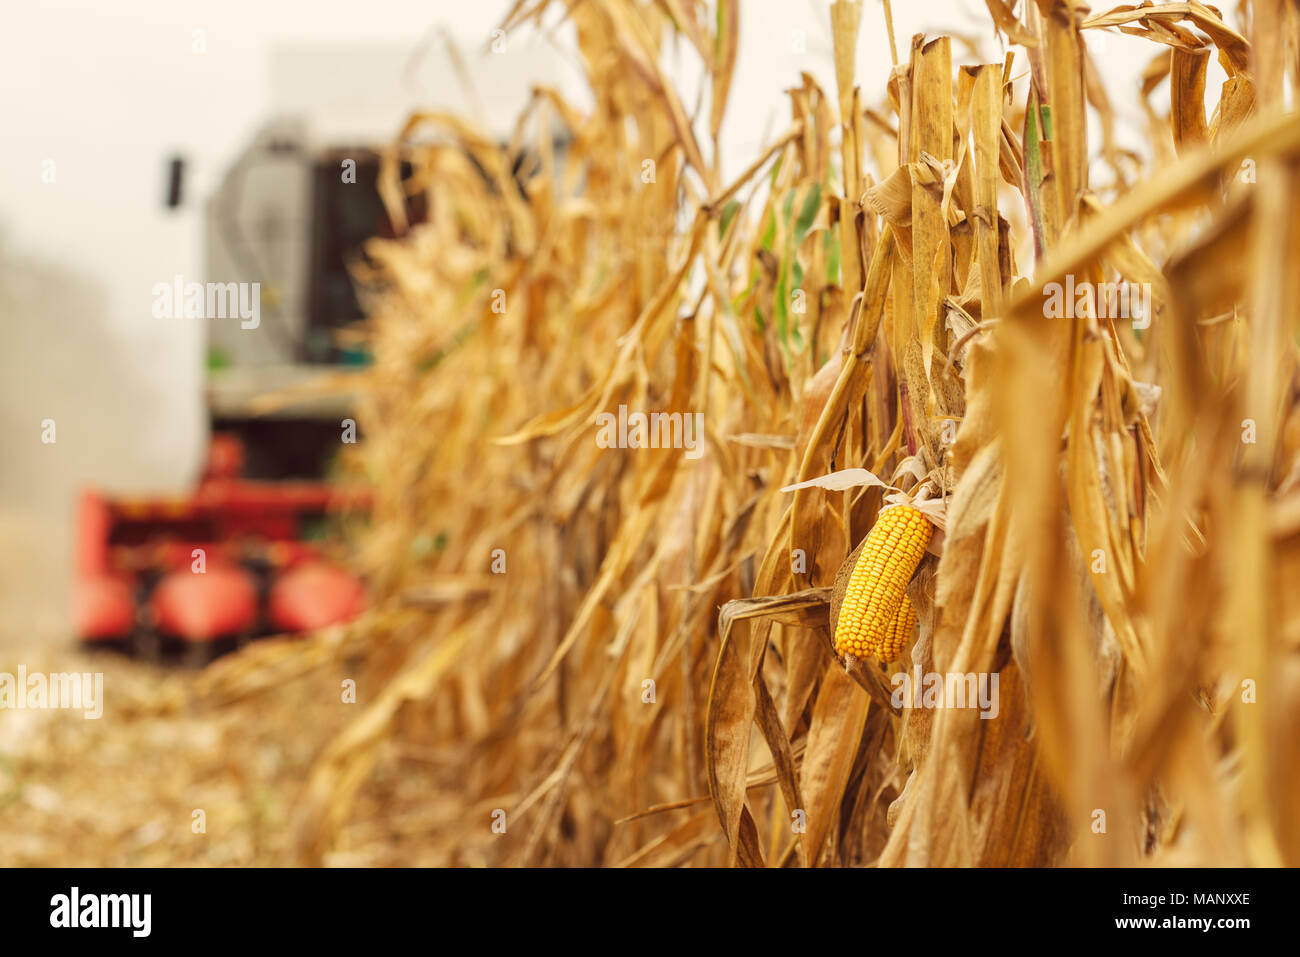 Harvesting corn crop field. Combine harvester working on plantation. Agricultural machinery gathering ripe maize crops. Stock Photo